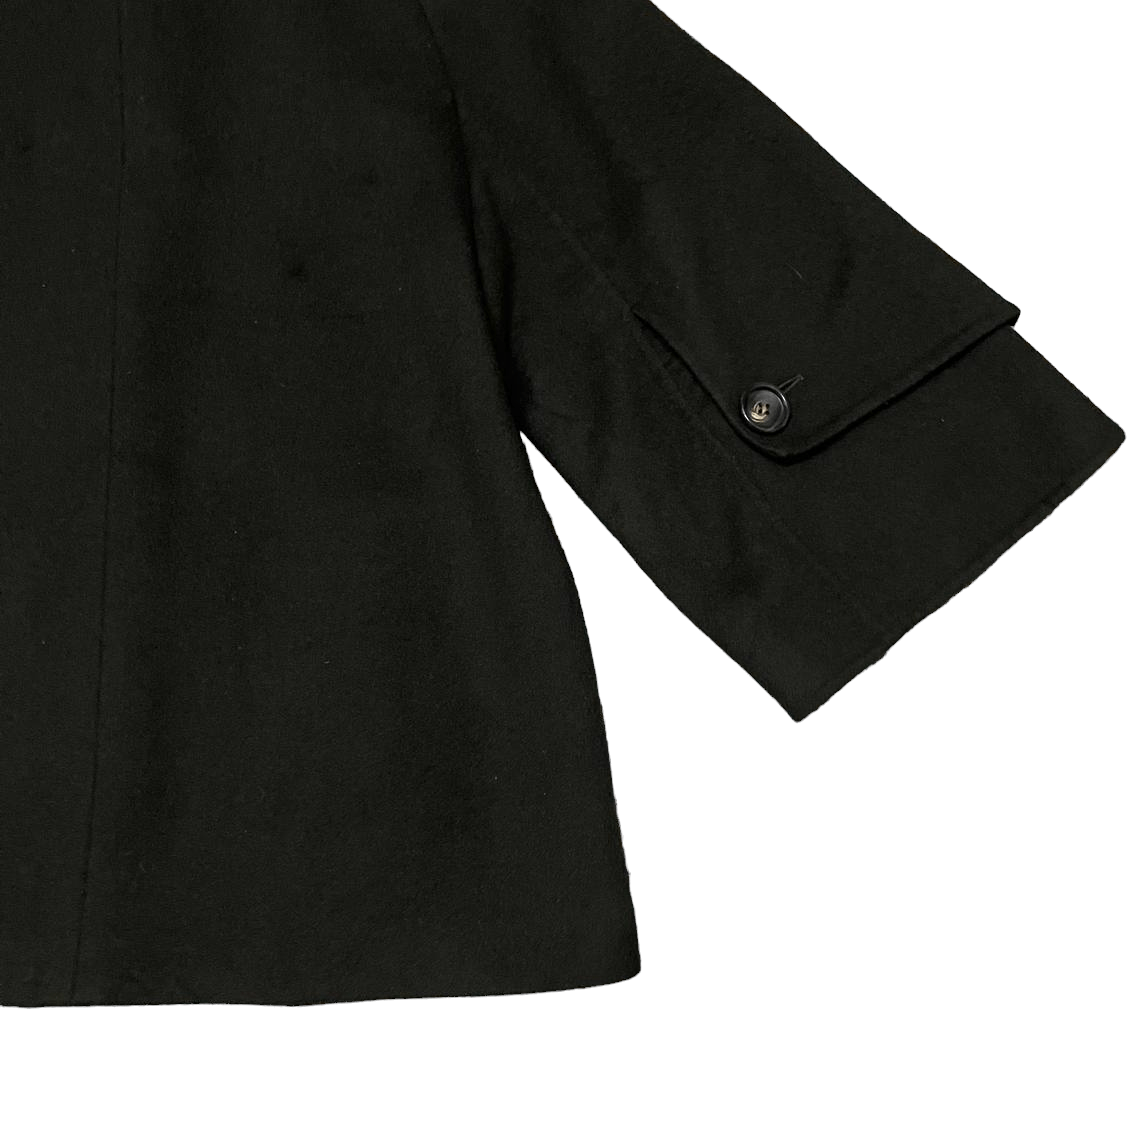 Archival Clothing - Archive Max Mara Made in Italy Wool Coat - 13